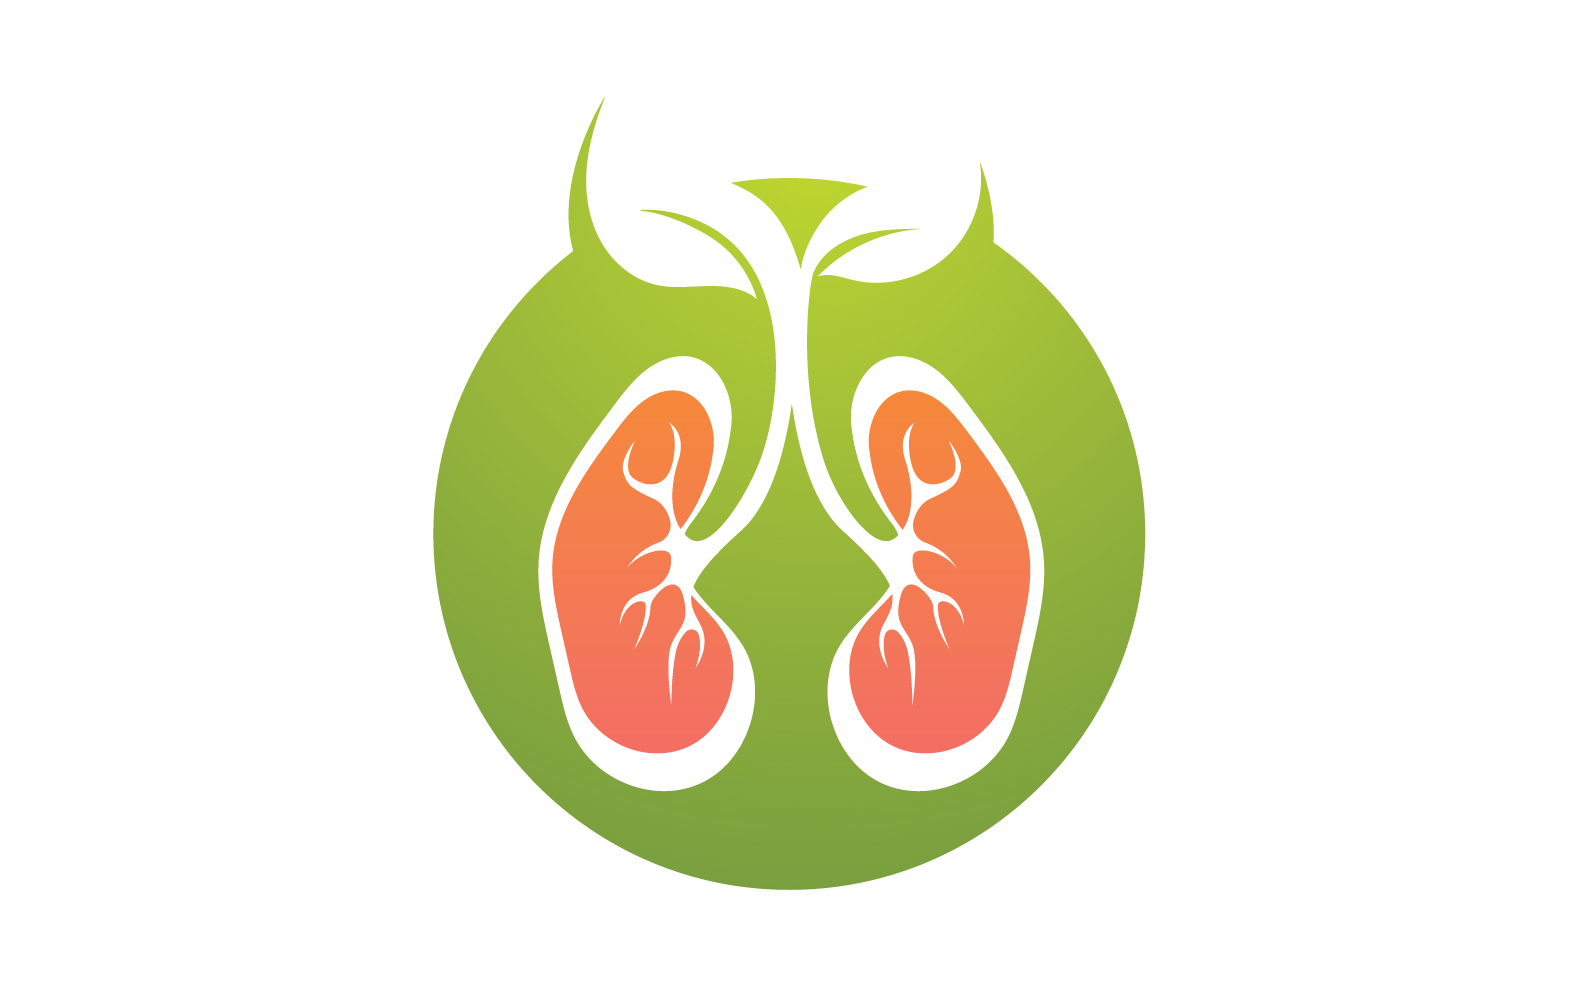 Health lungs logo and symbol vector v1